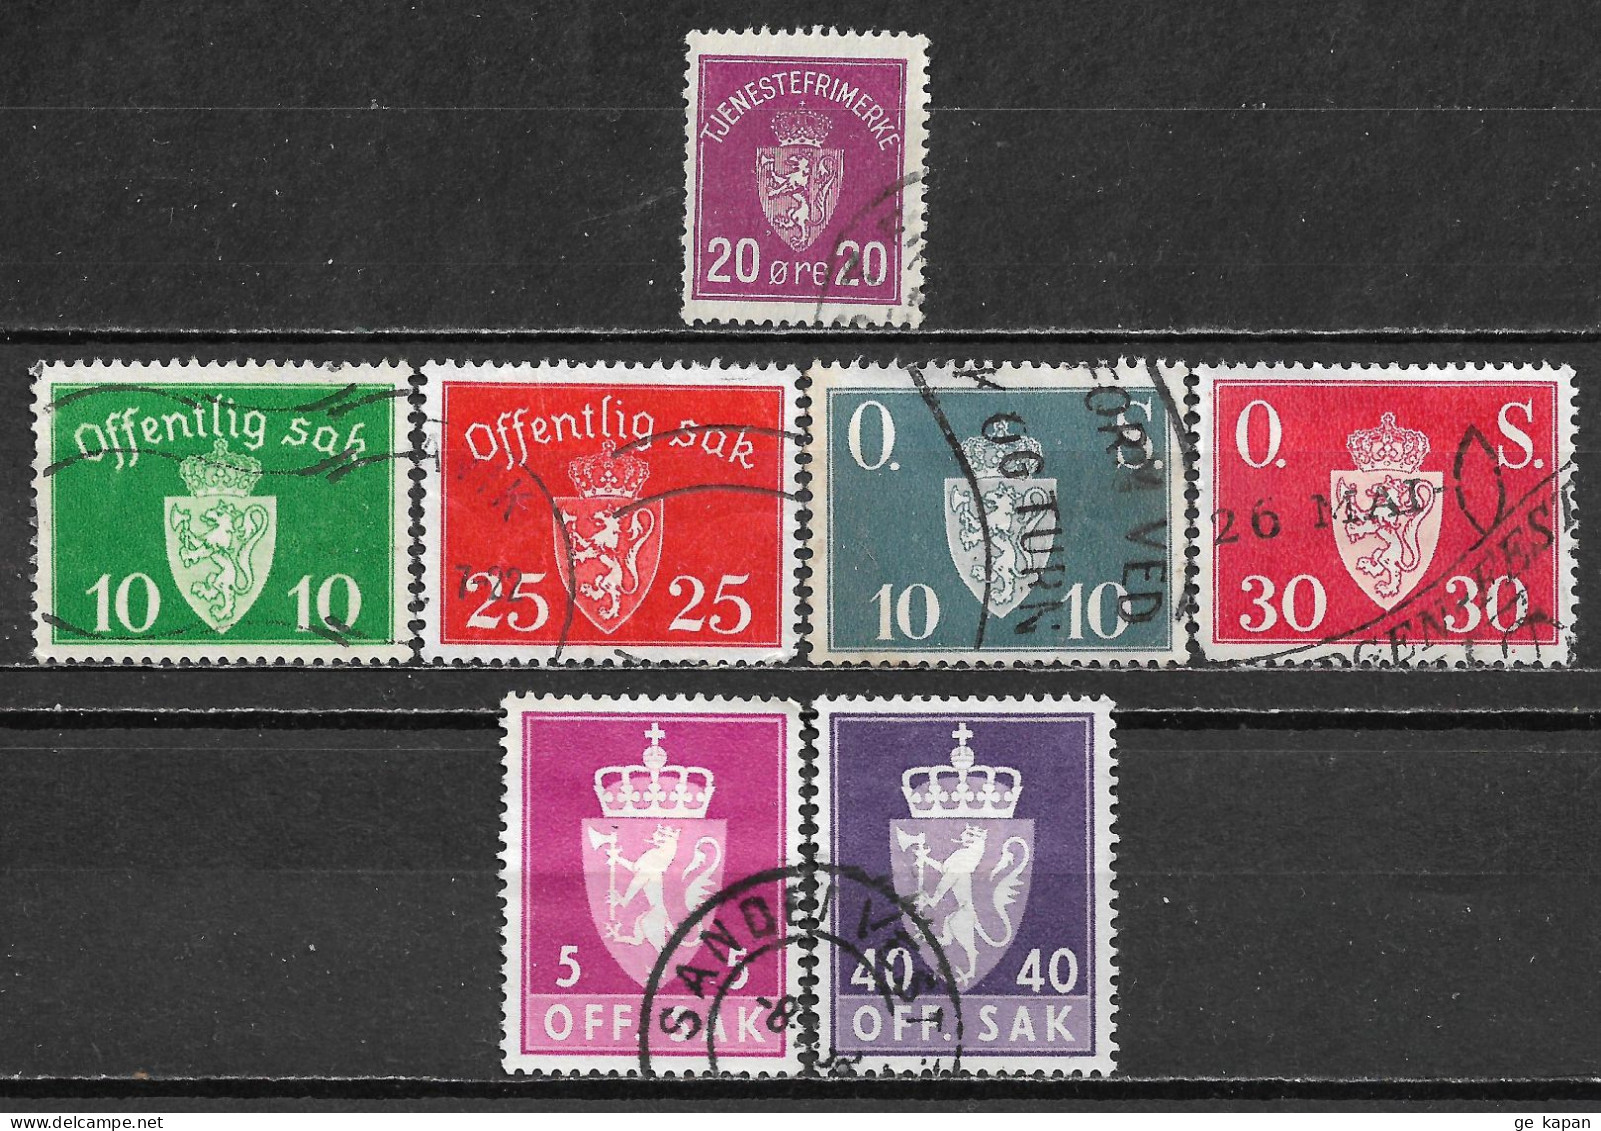 1926-1955 NORWAY SET OF 7 OFFICIAL USED STAMPS (Michel # 4,35,55,62,64,68x,75x) - Oficiales